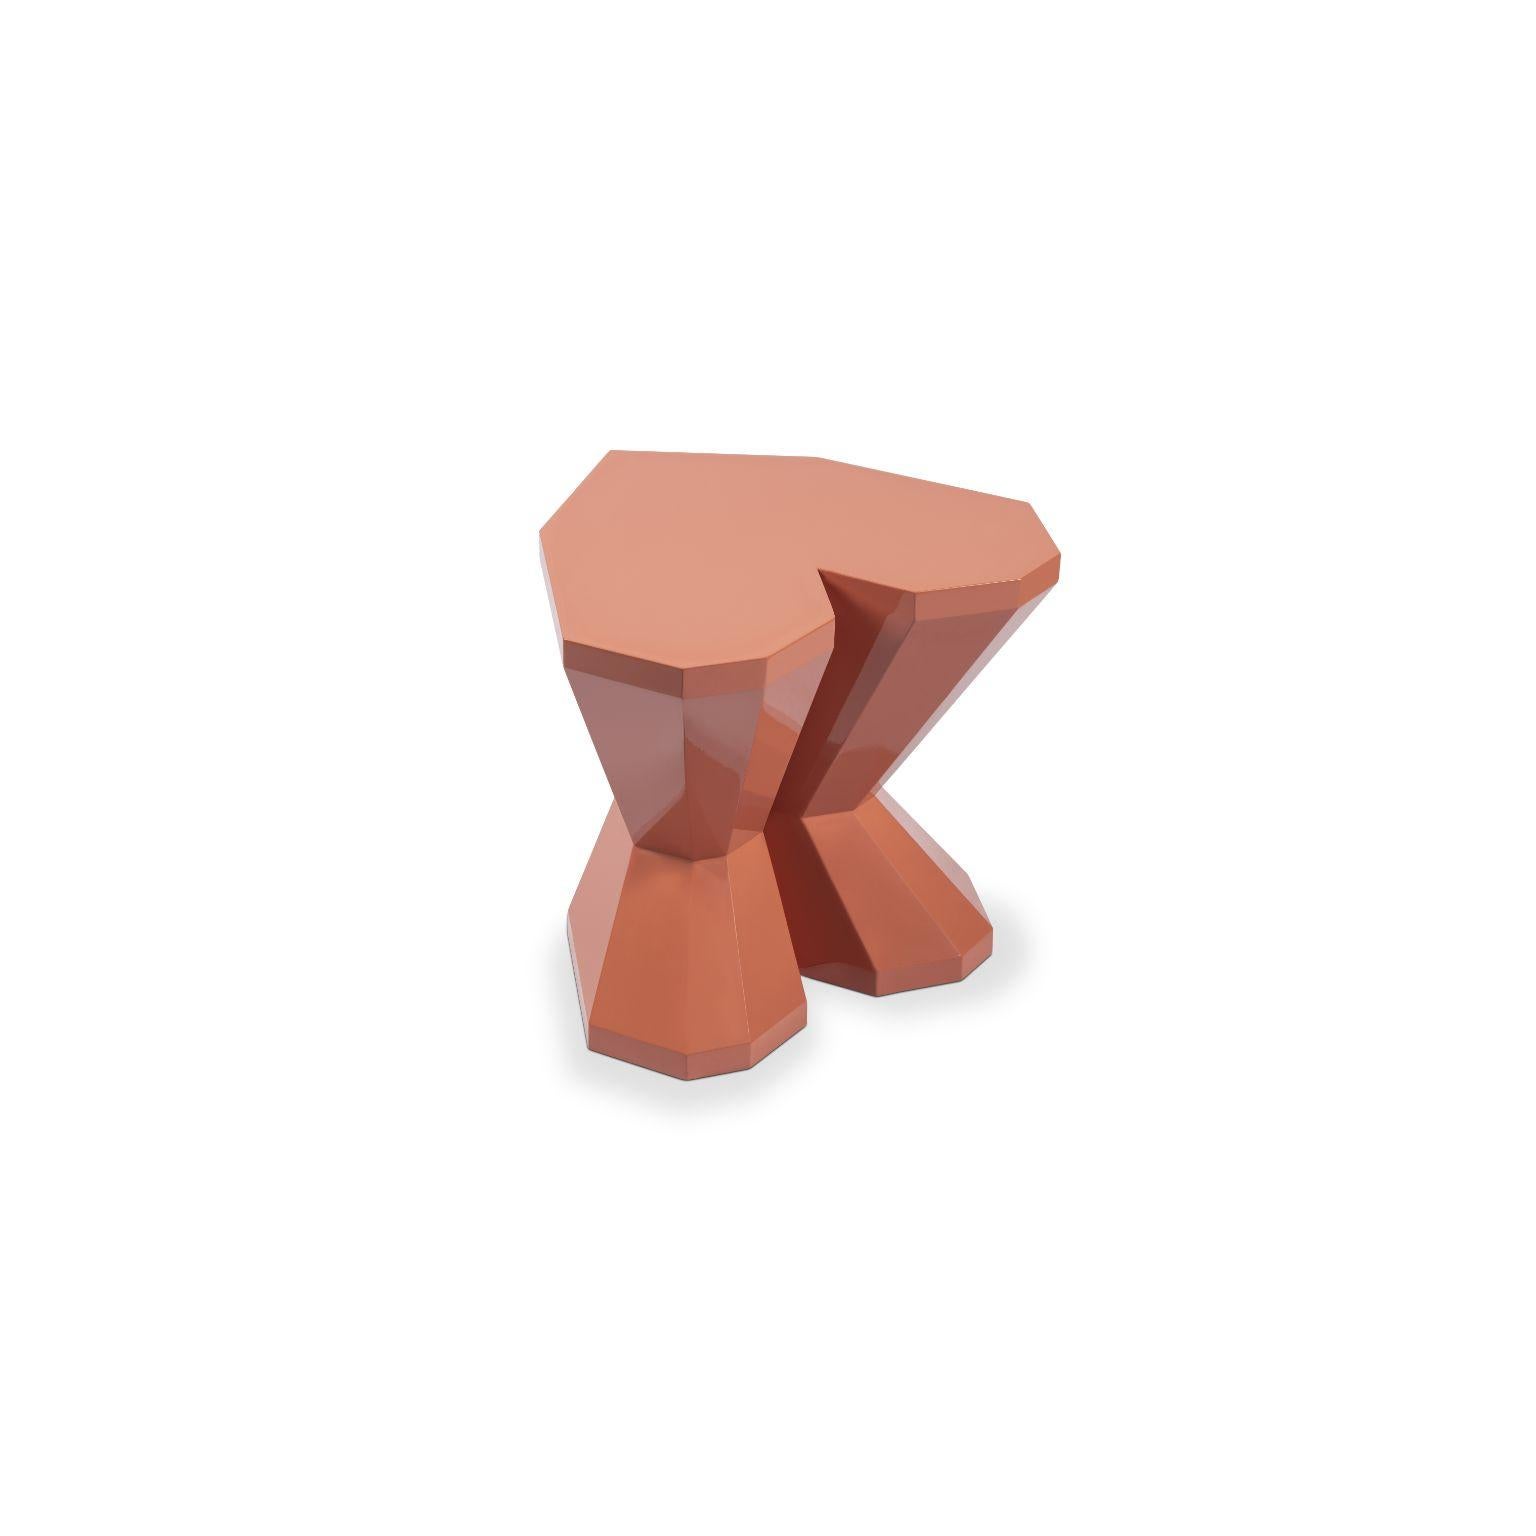 Queen heart small table by Royal Stranger
Dimensions: W 60 x D 50 x H 50 cm
Materials: Lacquered Wood, NCS/RAL colors with matte finish
Also available: gold, copper and silver leaf with glossy or matte finish and all NCS/RAL colors with matte or